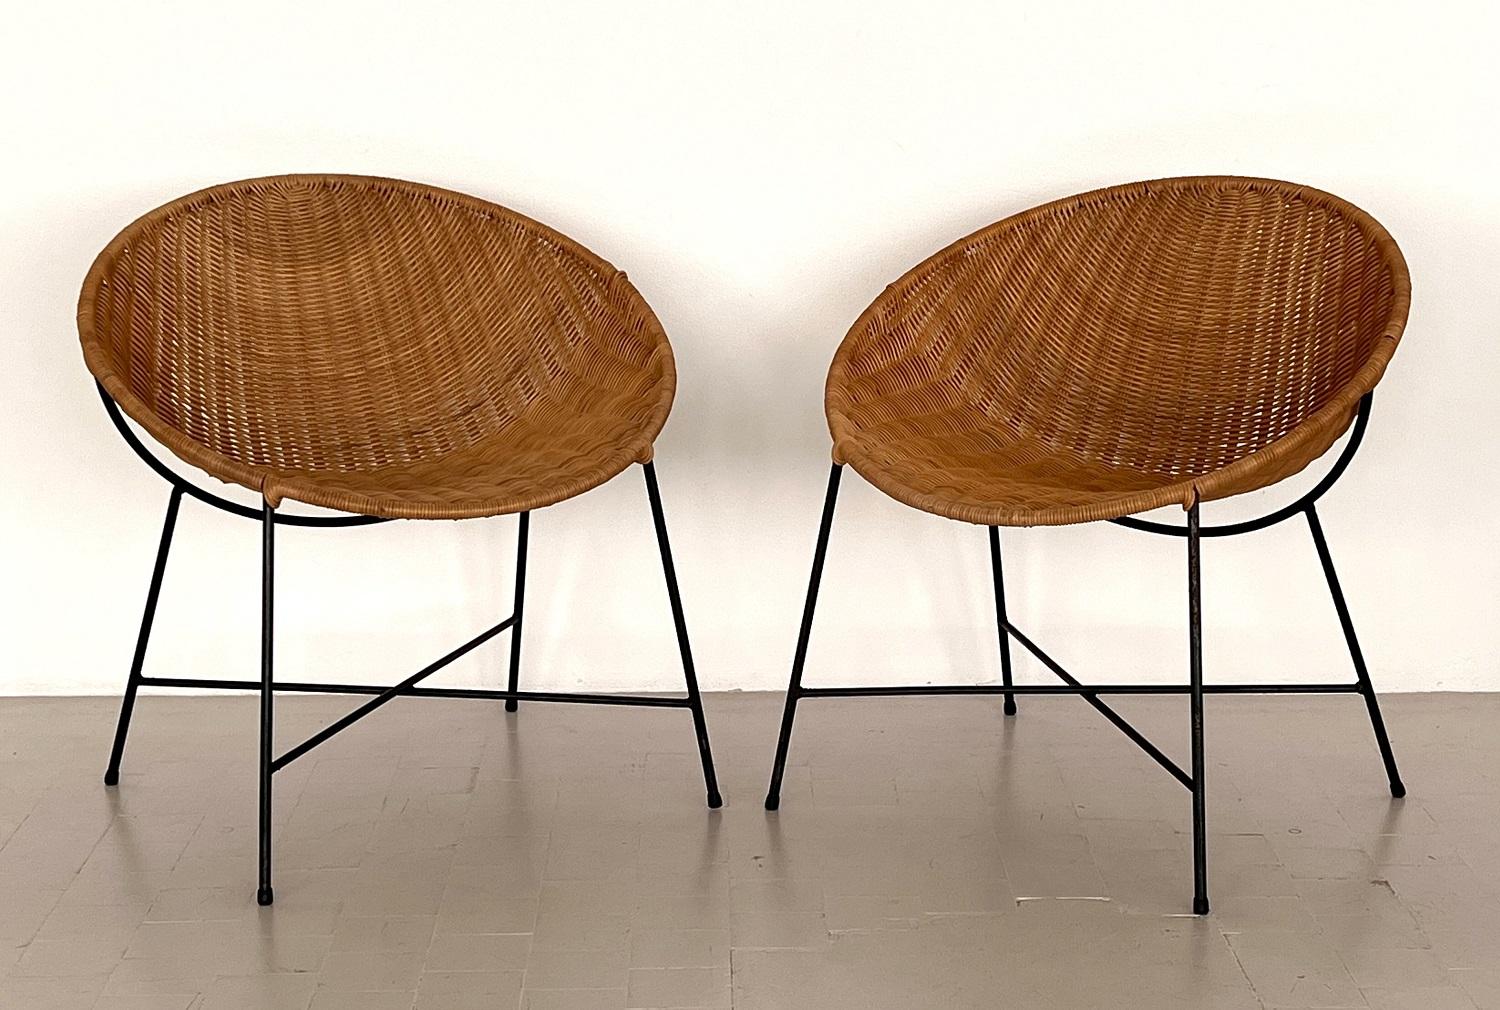 Hand-Crafted Pair of Mid-Century Rattan Lounge Chairs, 1970s For Sale